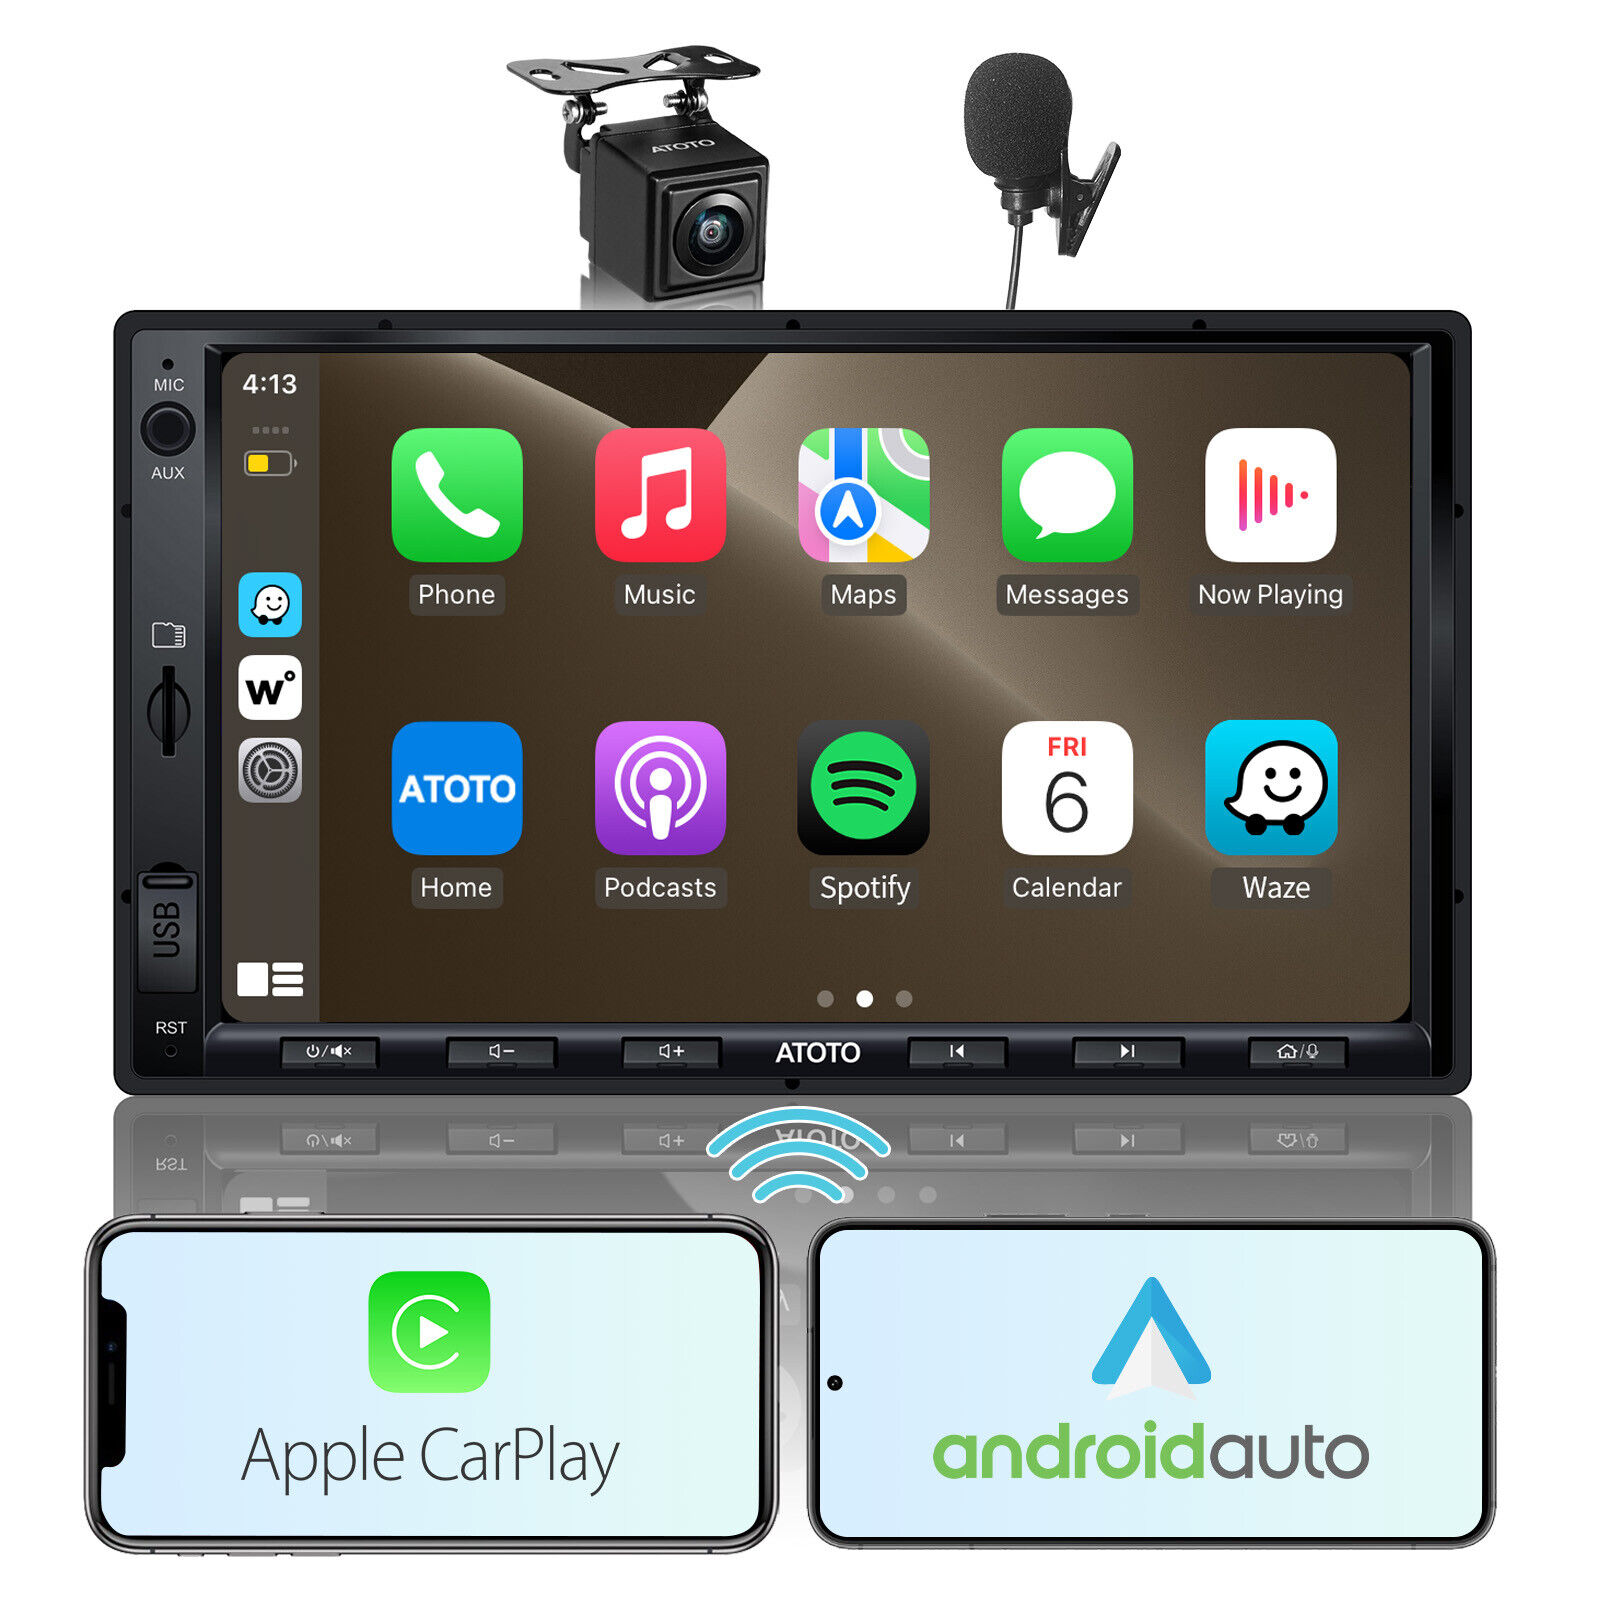 ATOTO F7 WE 2DID Wireless Android Auto &CarPlay Car Stereo w/ HD Rearview Camera